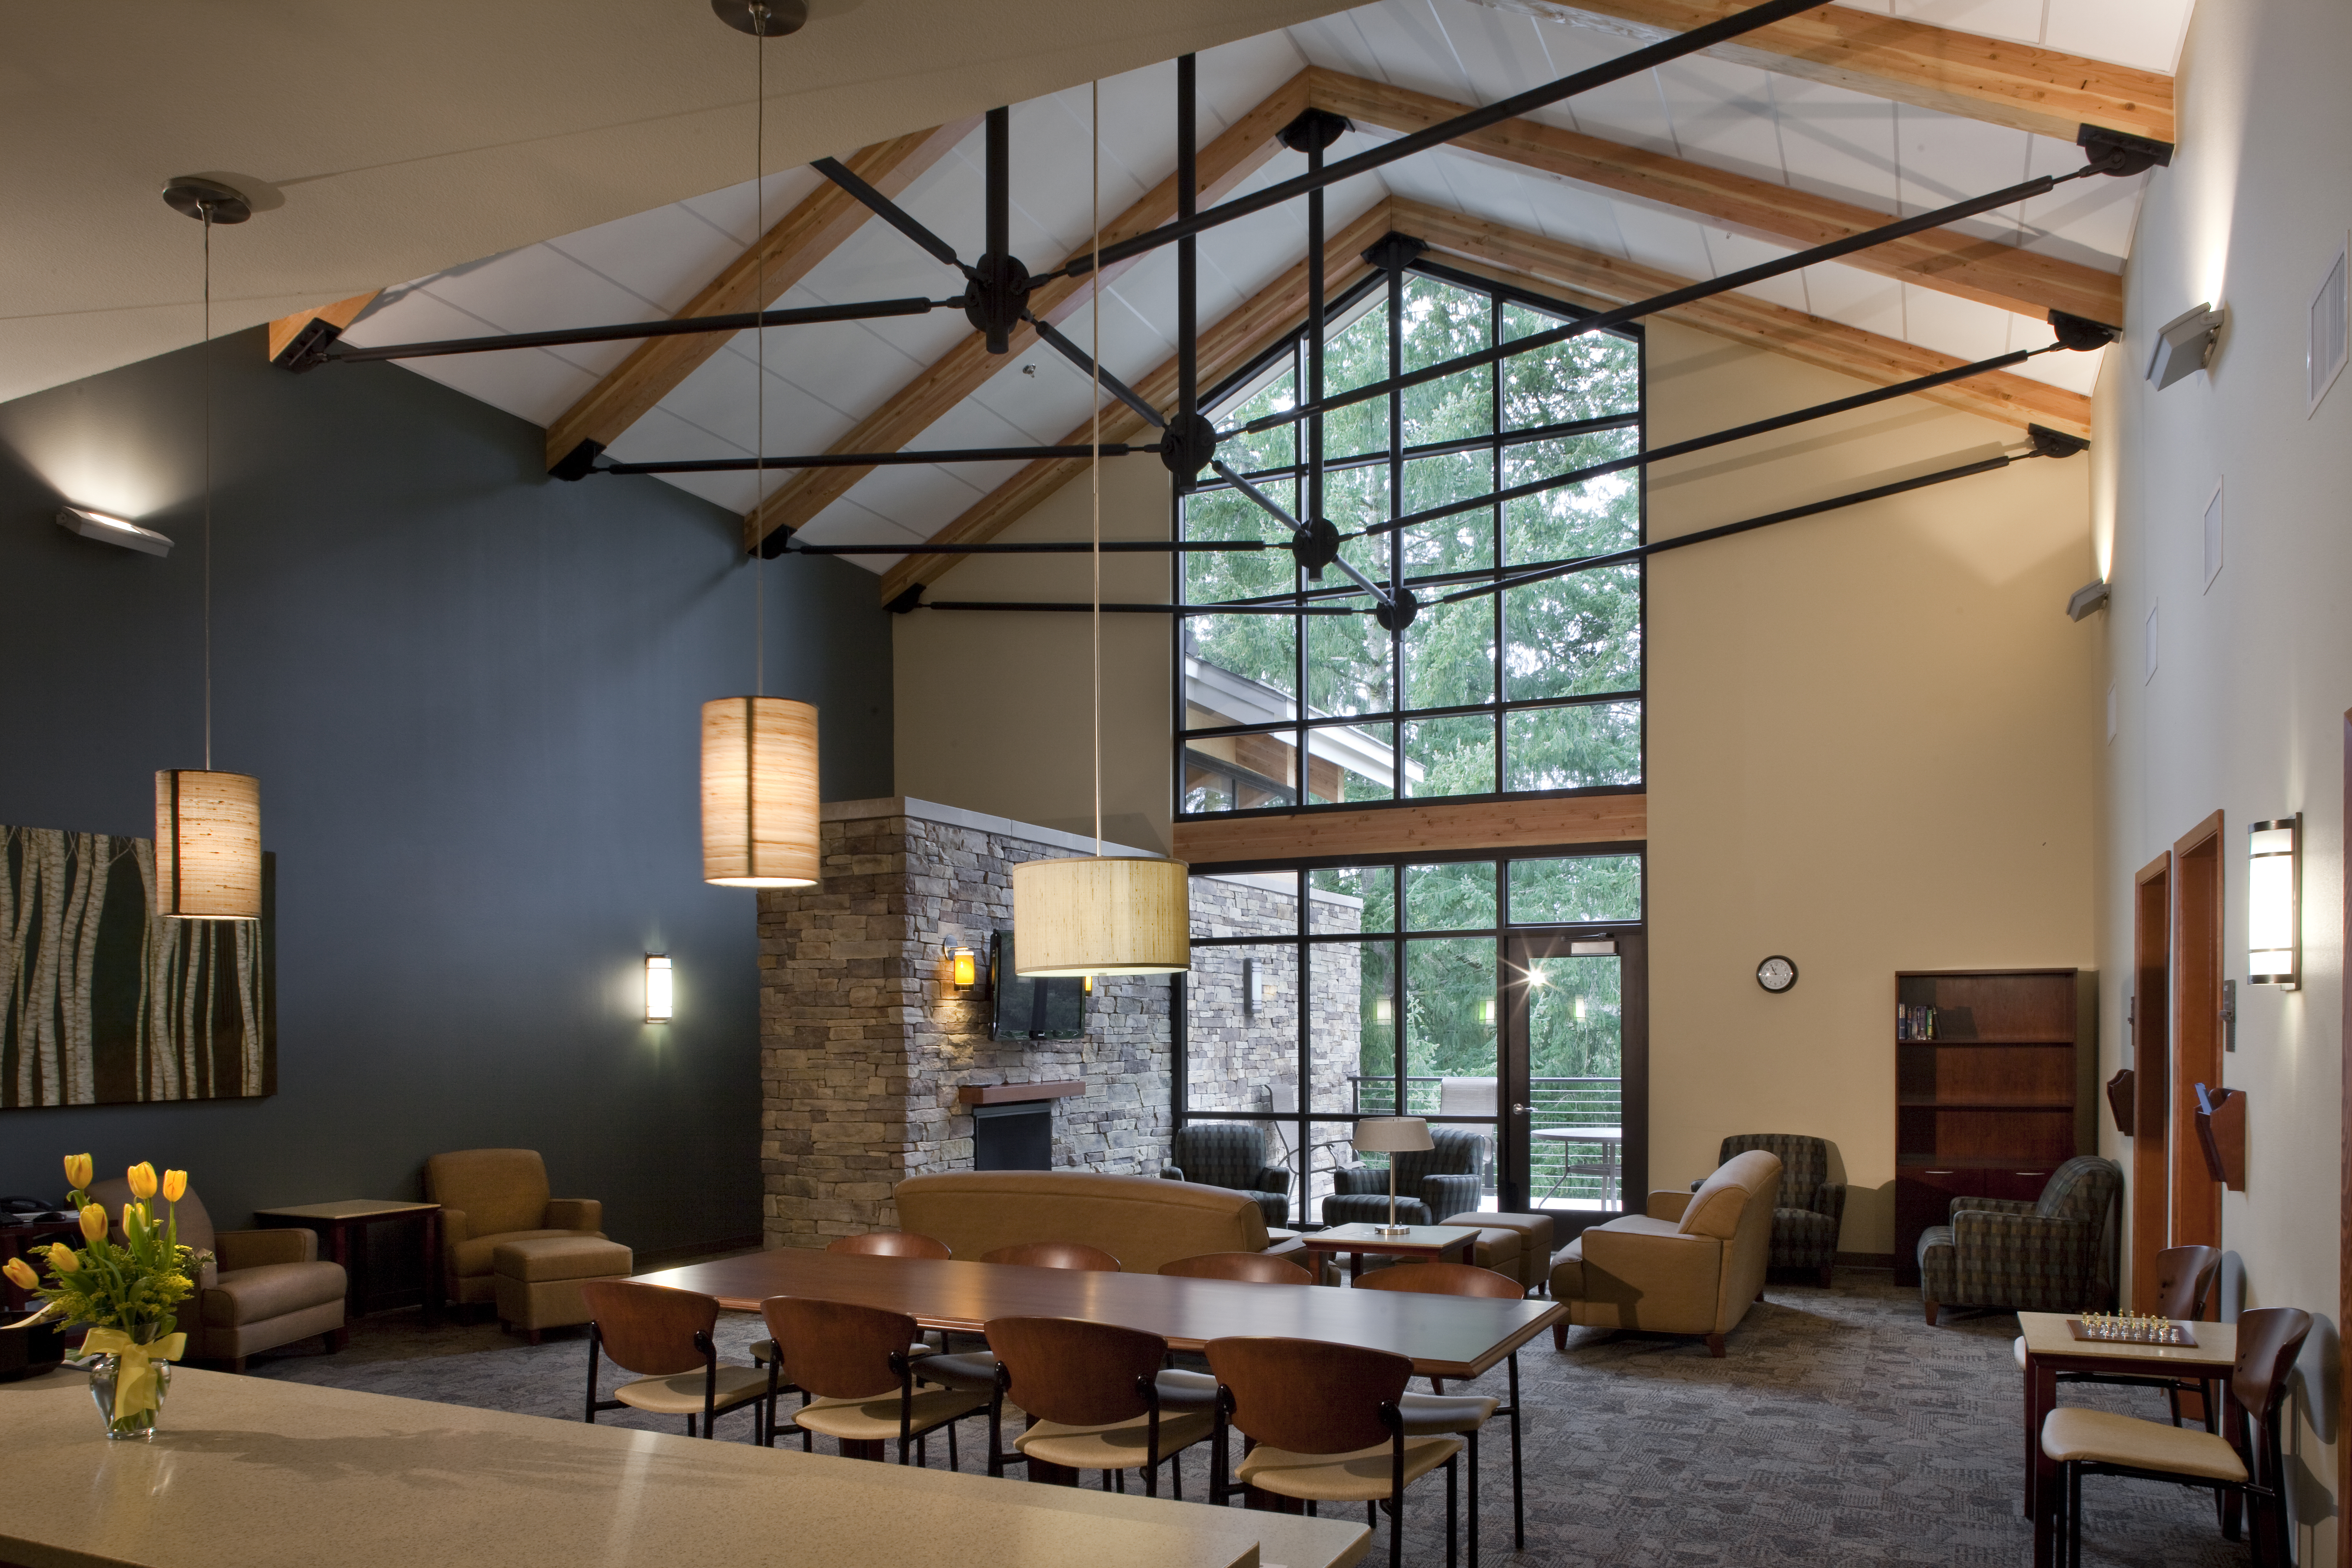 Inside the newberg lounge with tall ceilings and comfortable chairs and a community table